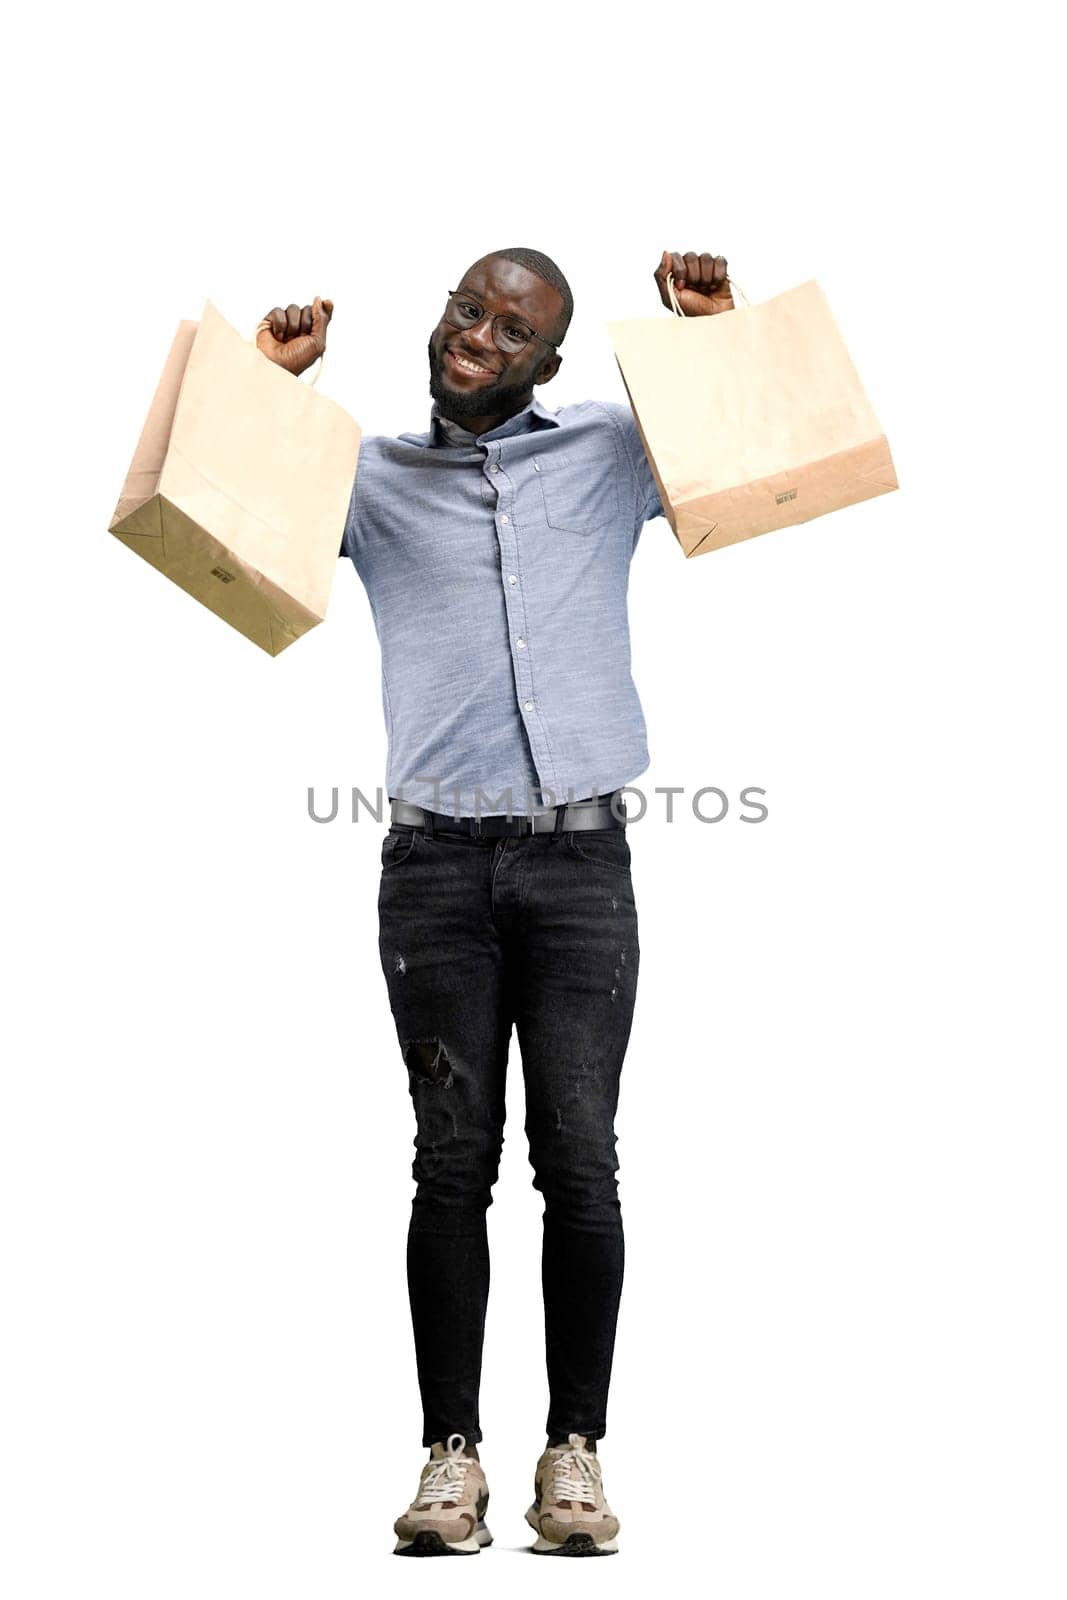 A man, full-length, on a white background, with bags.